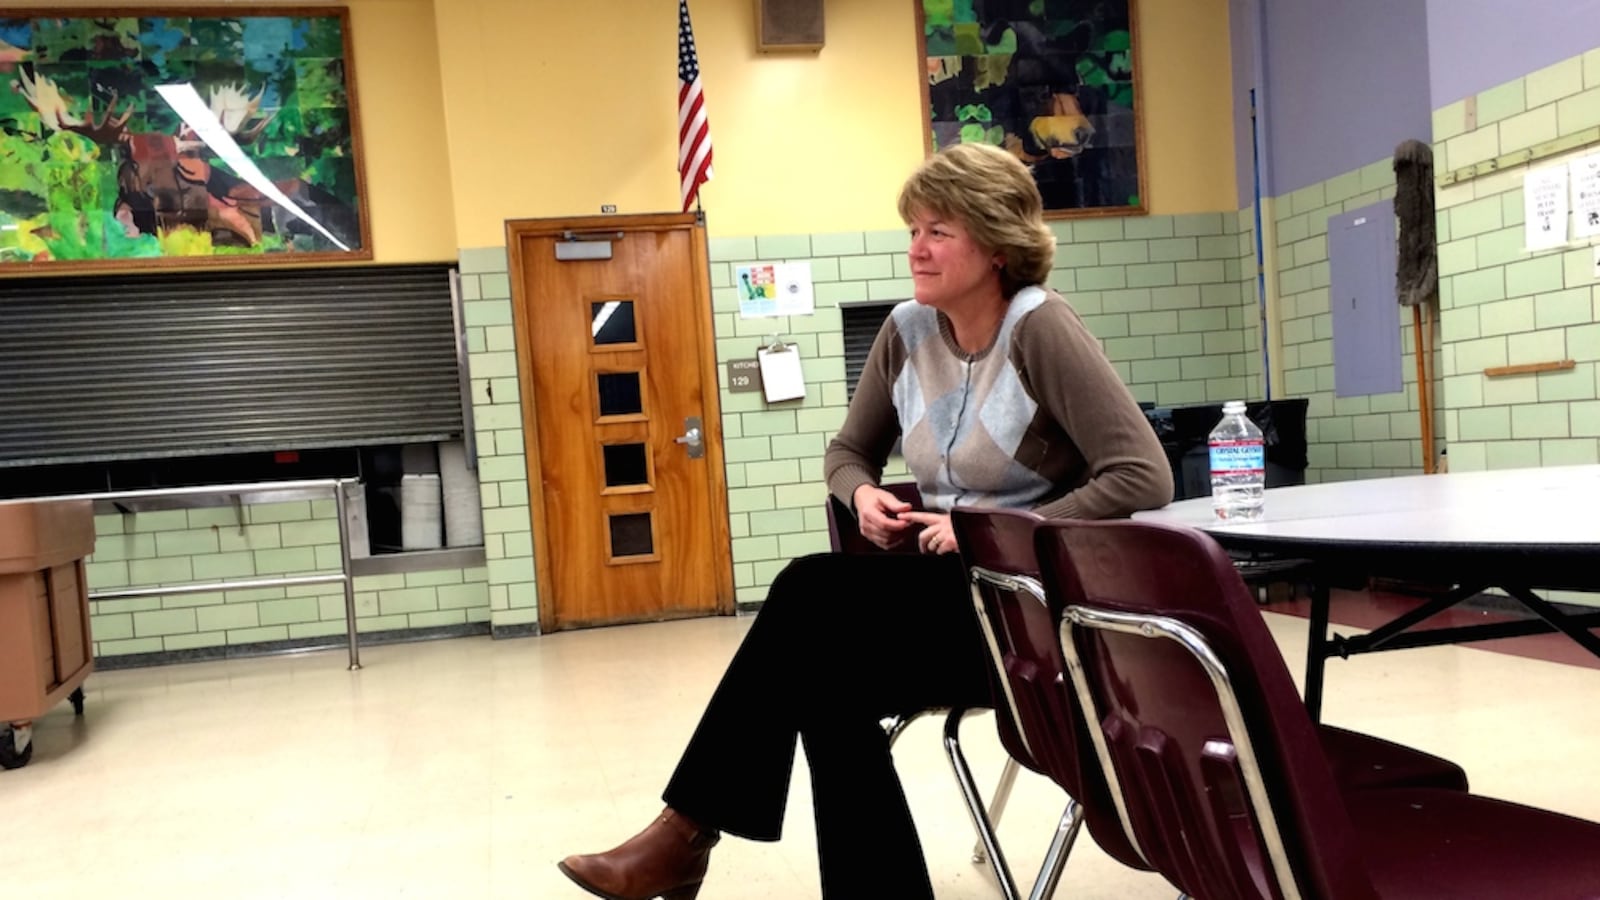 Anne Rowe, vice president of the Denver Public Schools Board of Education, sits on the sidelines during a March town hall meeting at Merrill Middle School on The Denver Plan. Rowe has led the board's work on updating the district's strategic document.